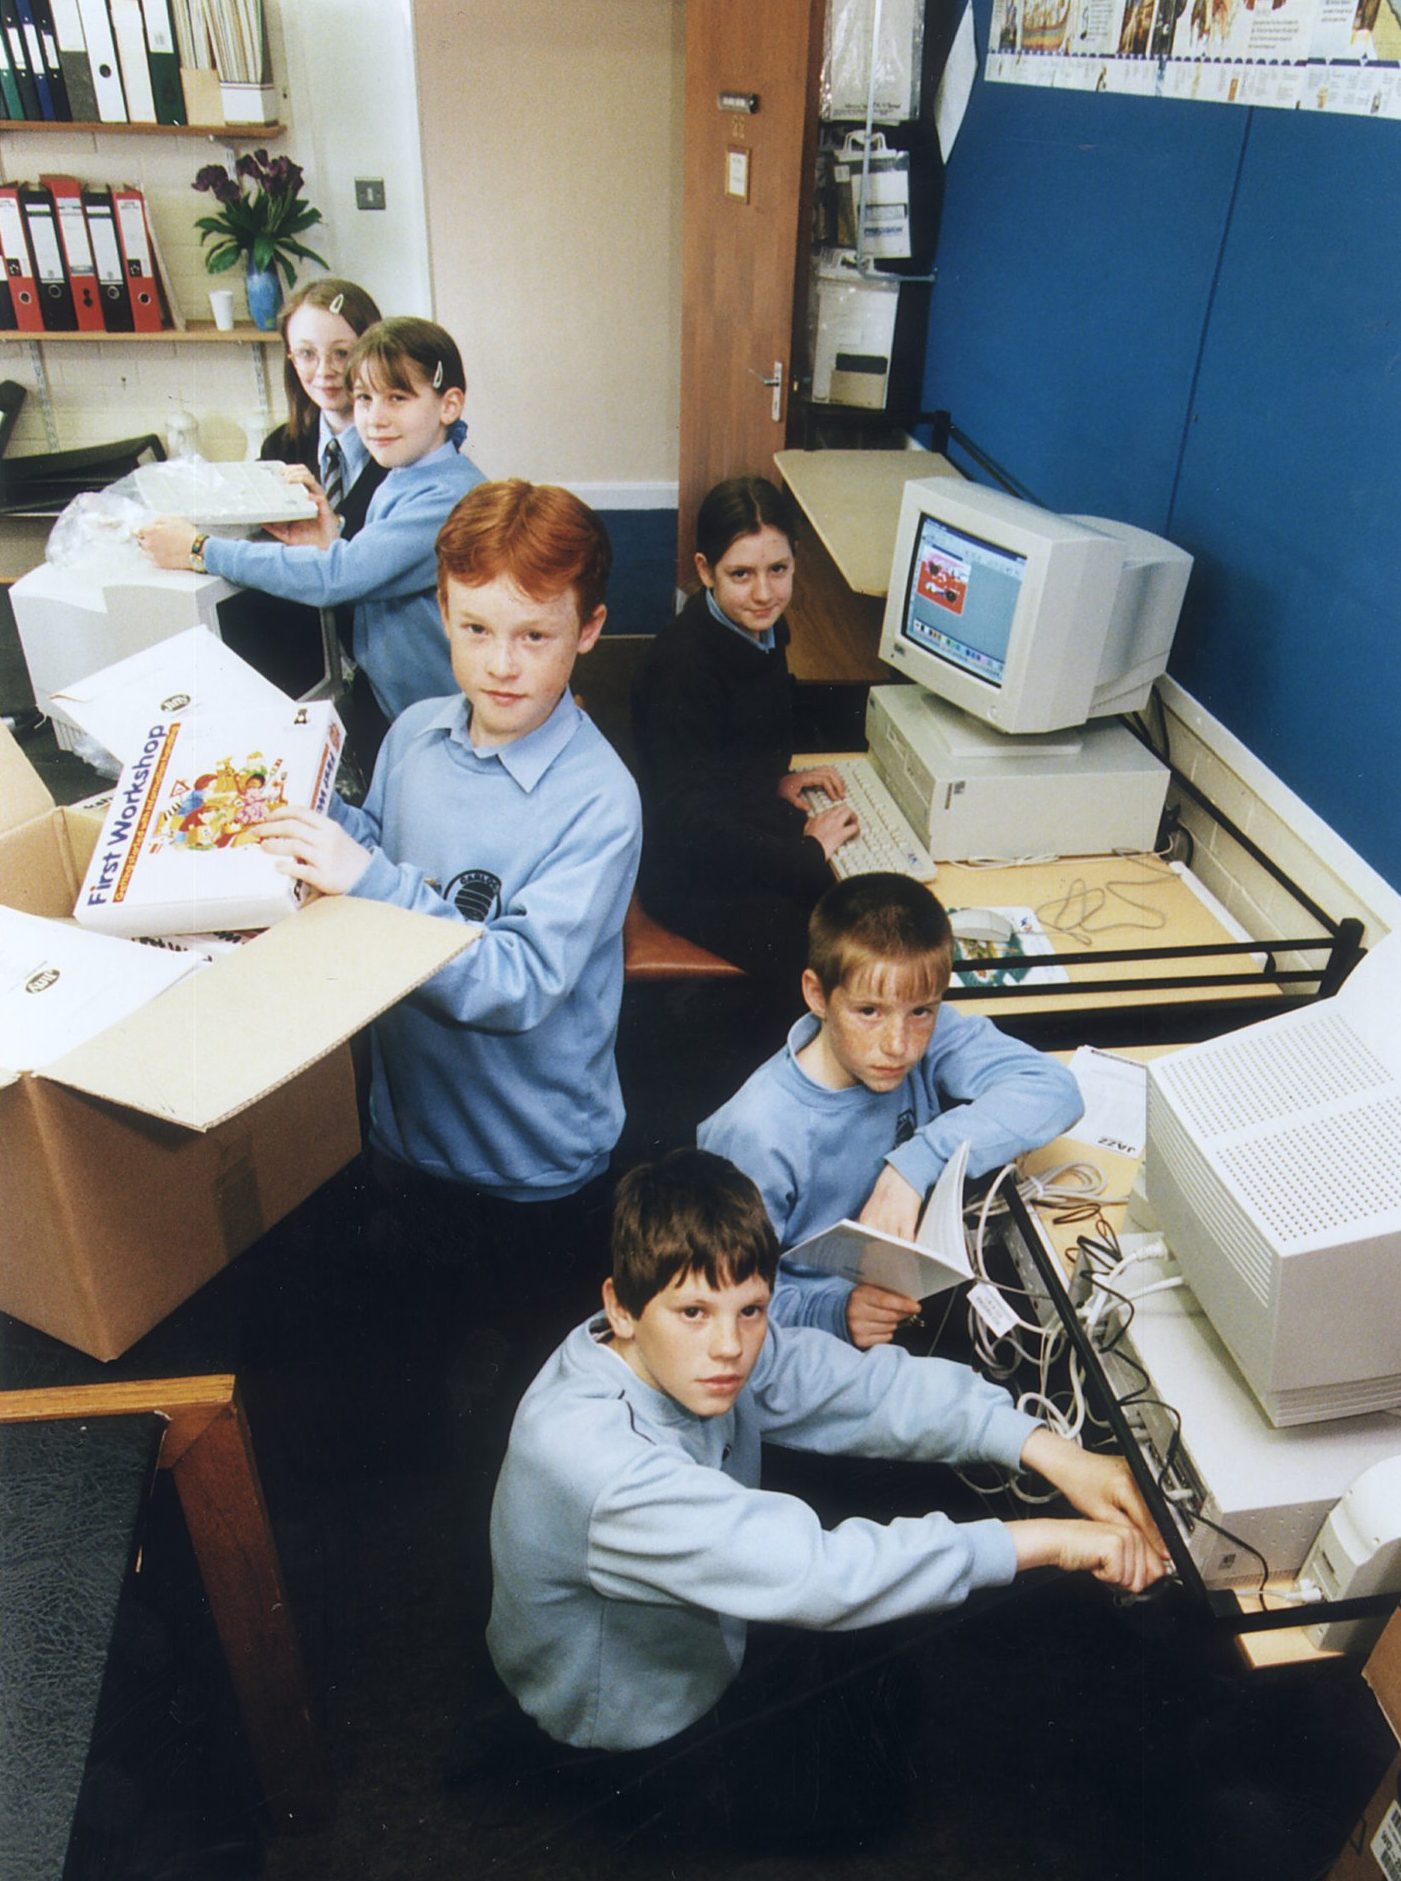 The Carlogie Primary School pupils unpacking the new computer equipment.